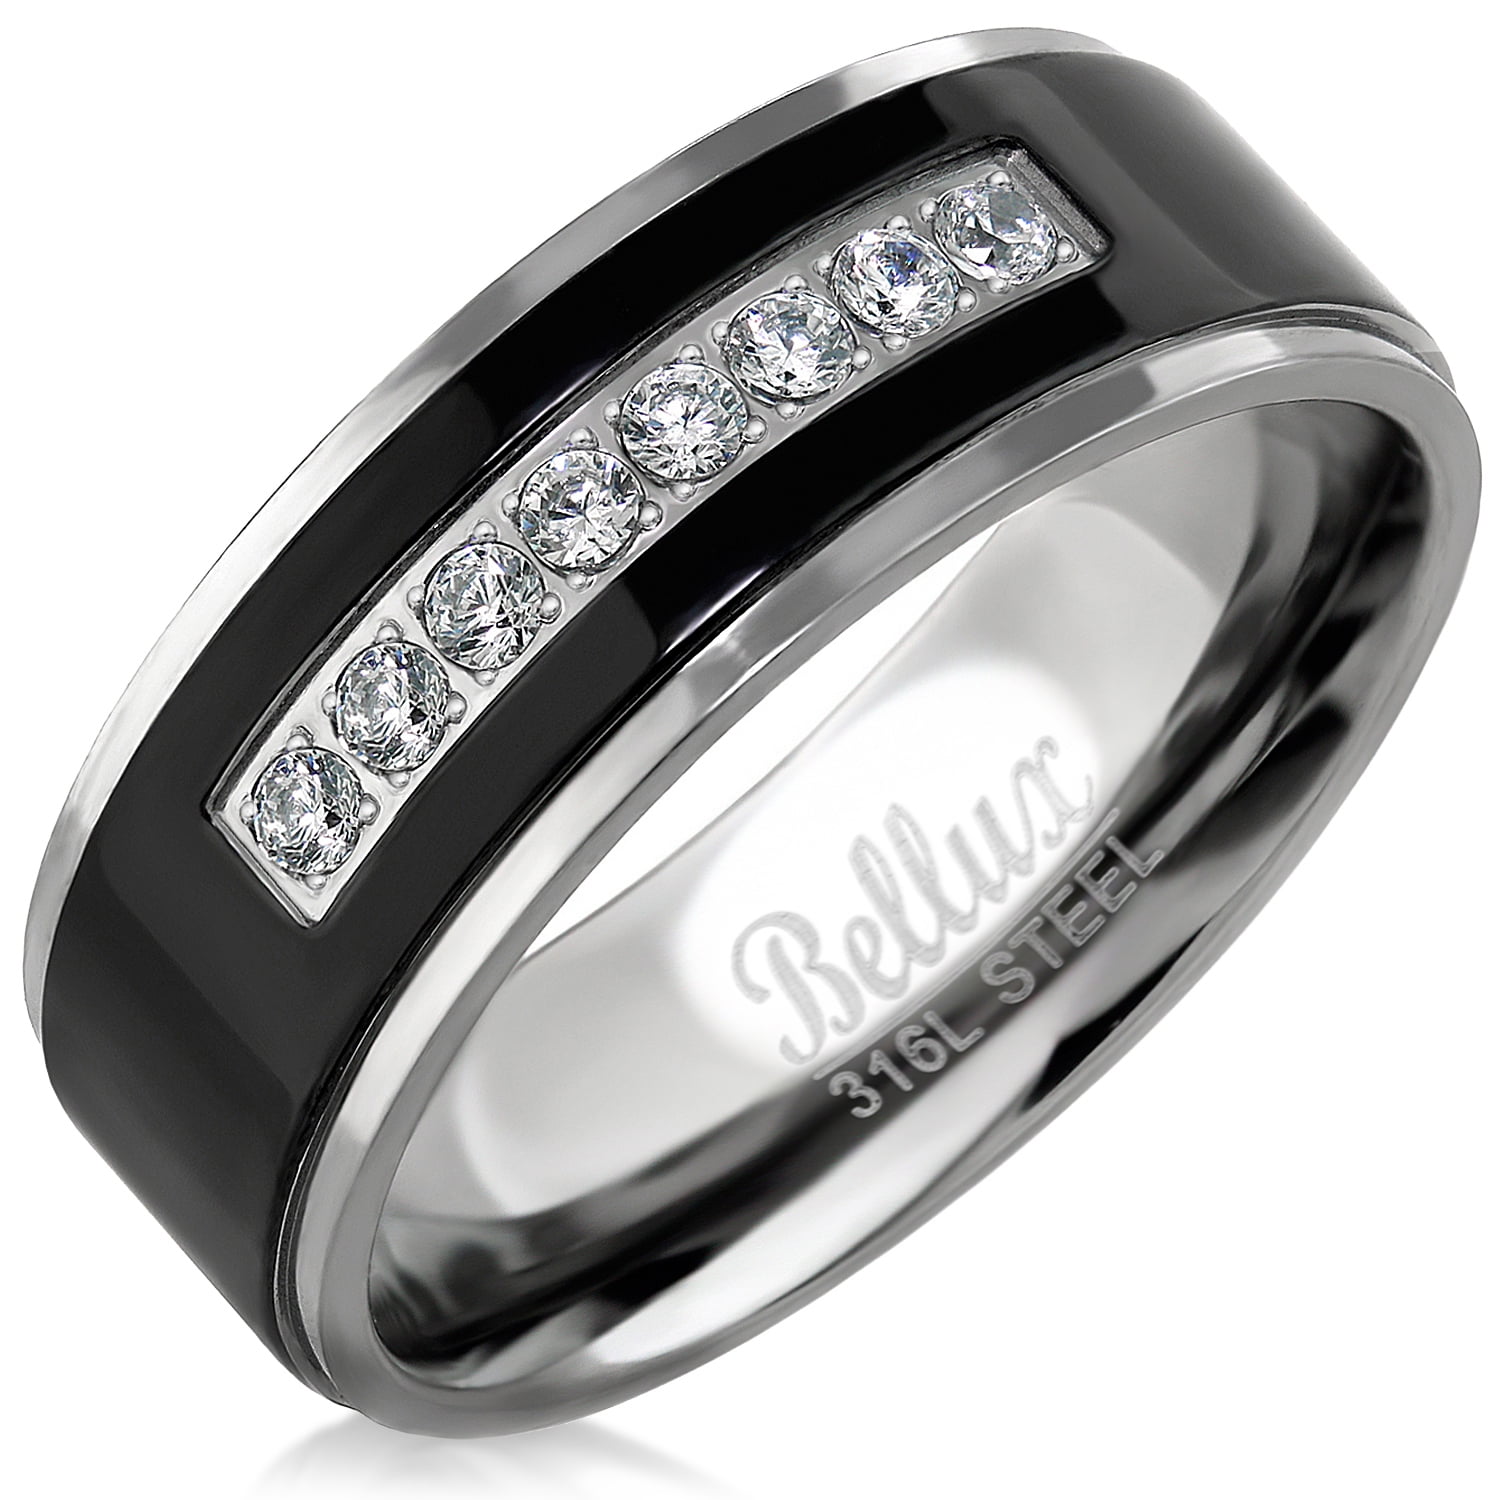 Bellux Style - Mens Wedding Bands Stainless Steel Promise Rings for Him Mens Stainless Steel Fashion Rings